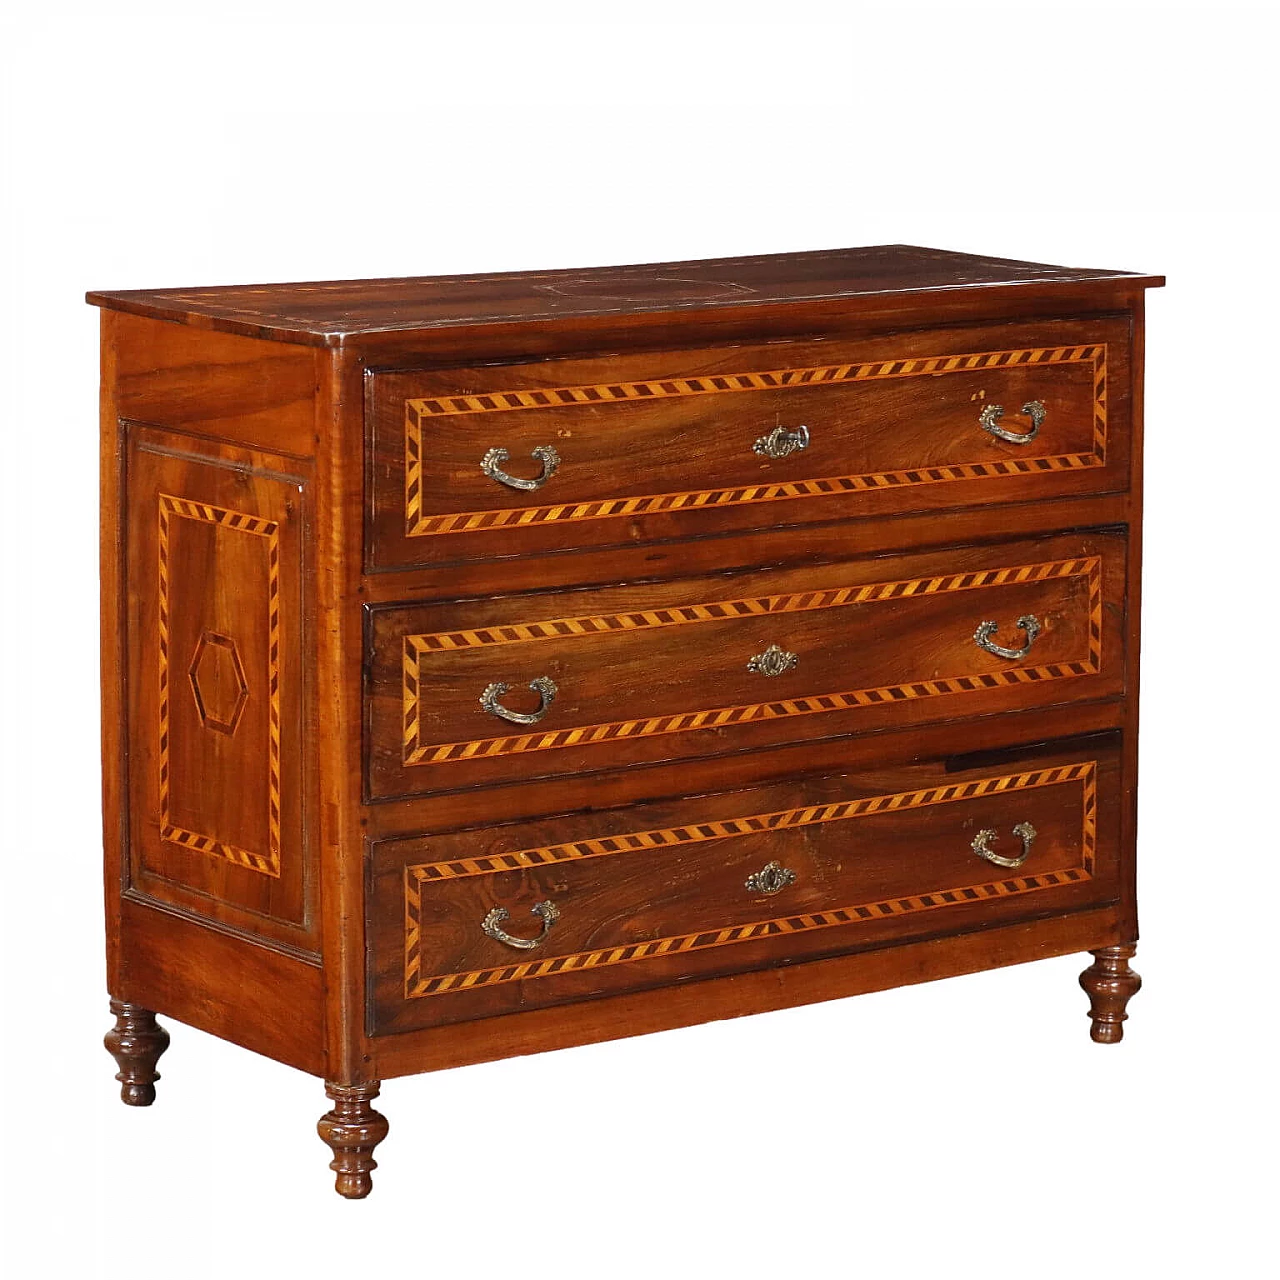 Neoclassical walnut canterano with maple inlays, 18th century 1